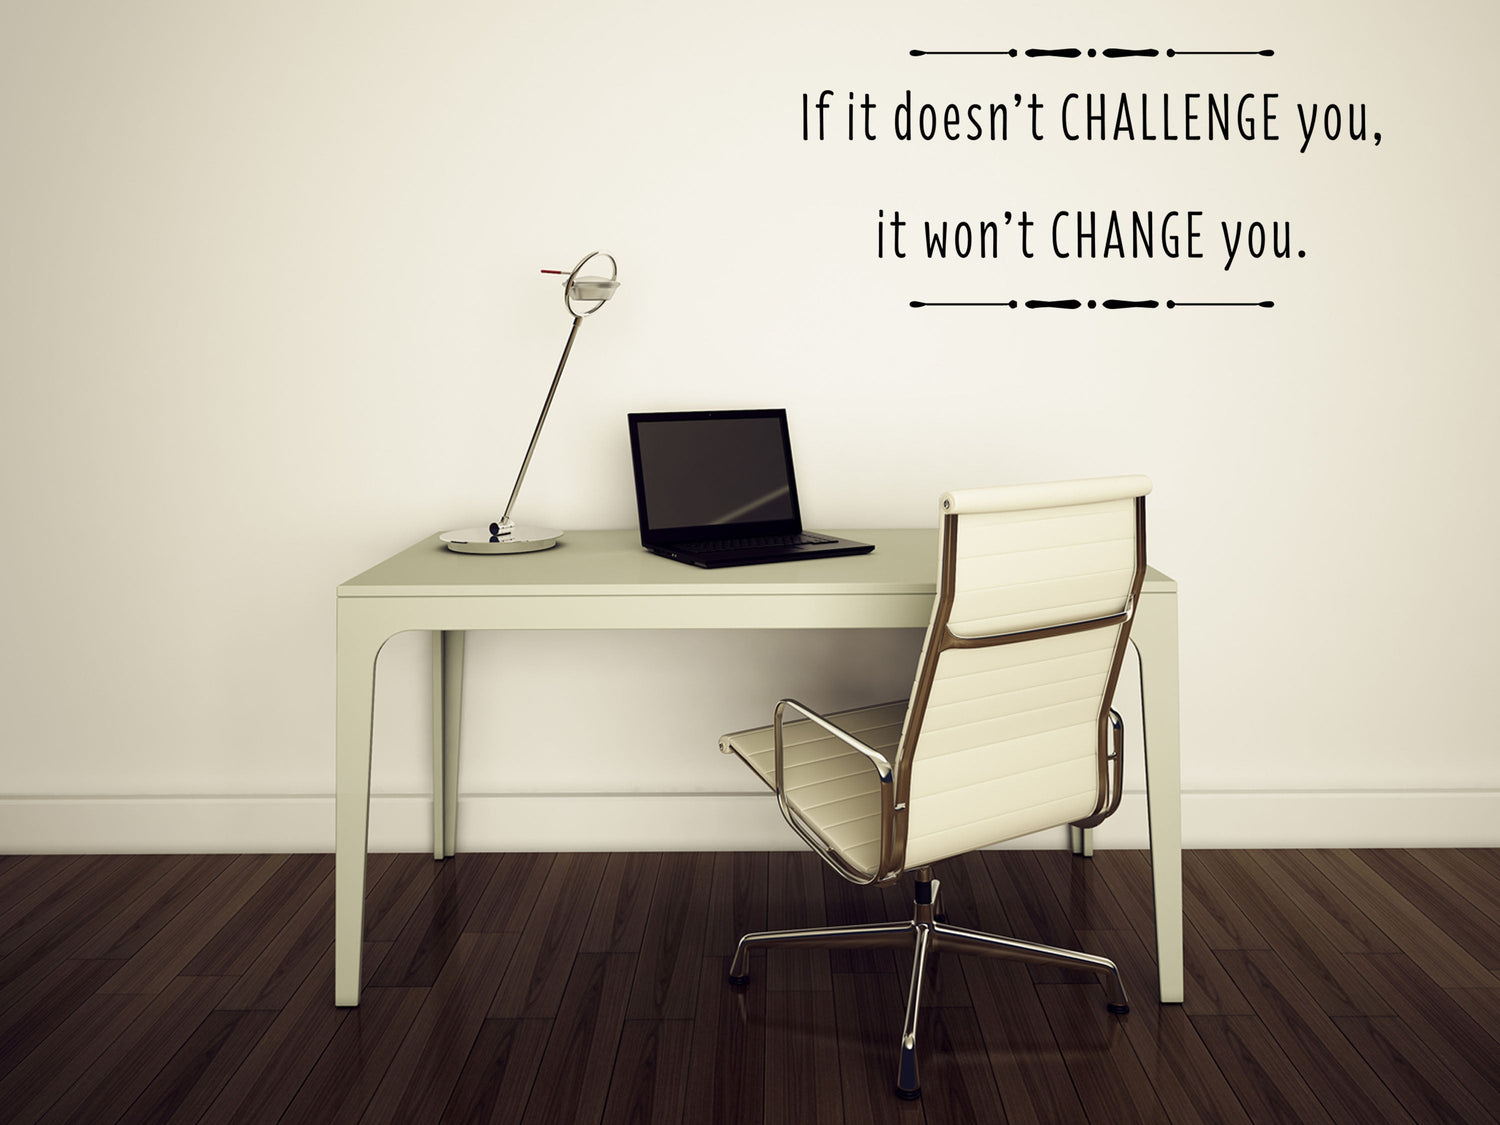 If It Doesn't Challenge Motivational Sticker Quote Vinyl Wall Decal Inspirational Wall Signs 